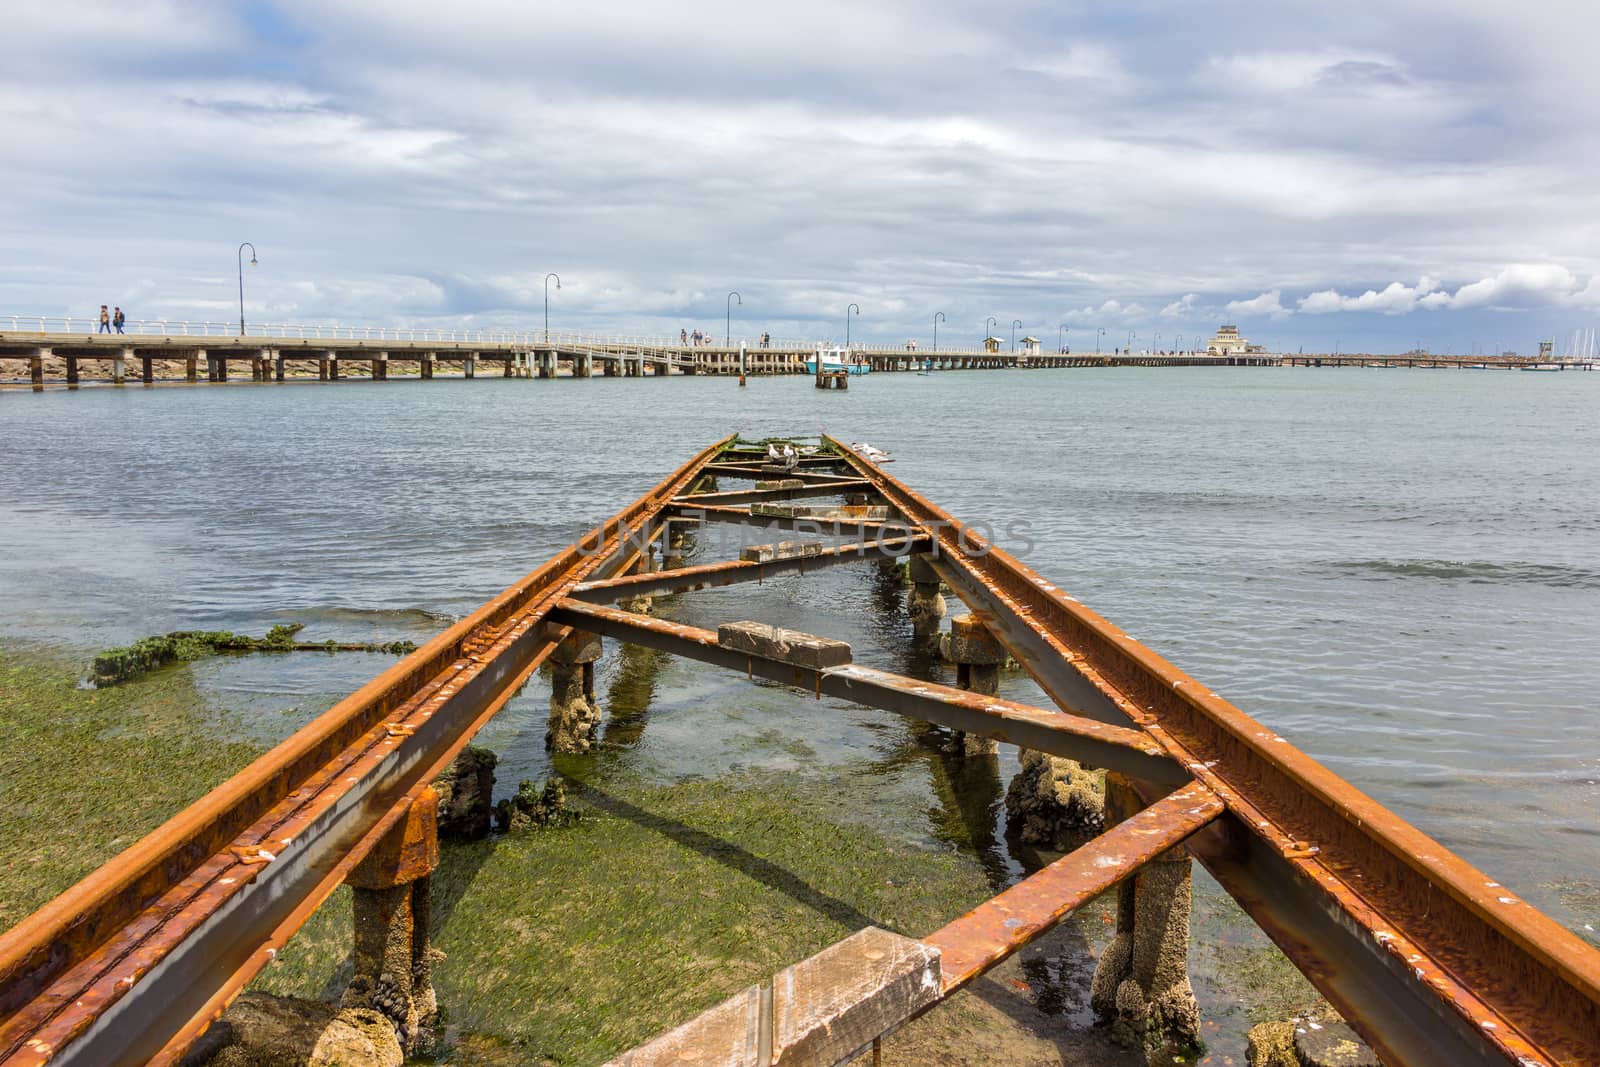 St Kilda Pier with an old boat slipway in the foreground. St Kilda, Australia